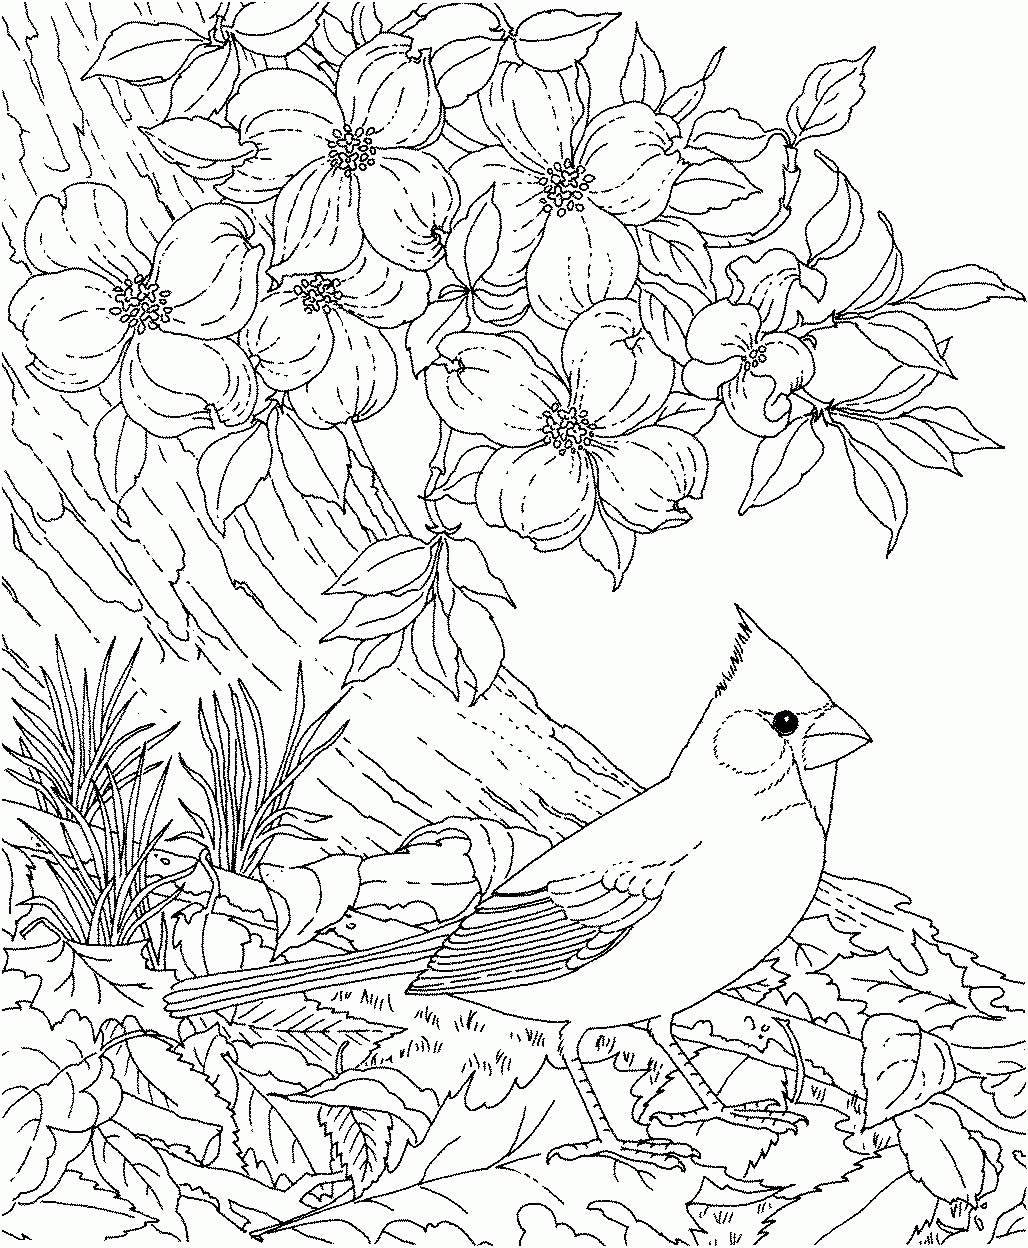 Image Detail For - Free Printable Coloring Pagenorth Carolina - Free Printable Pictures Of Cardinals